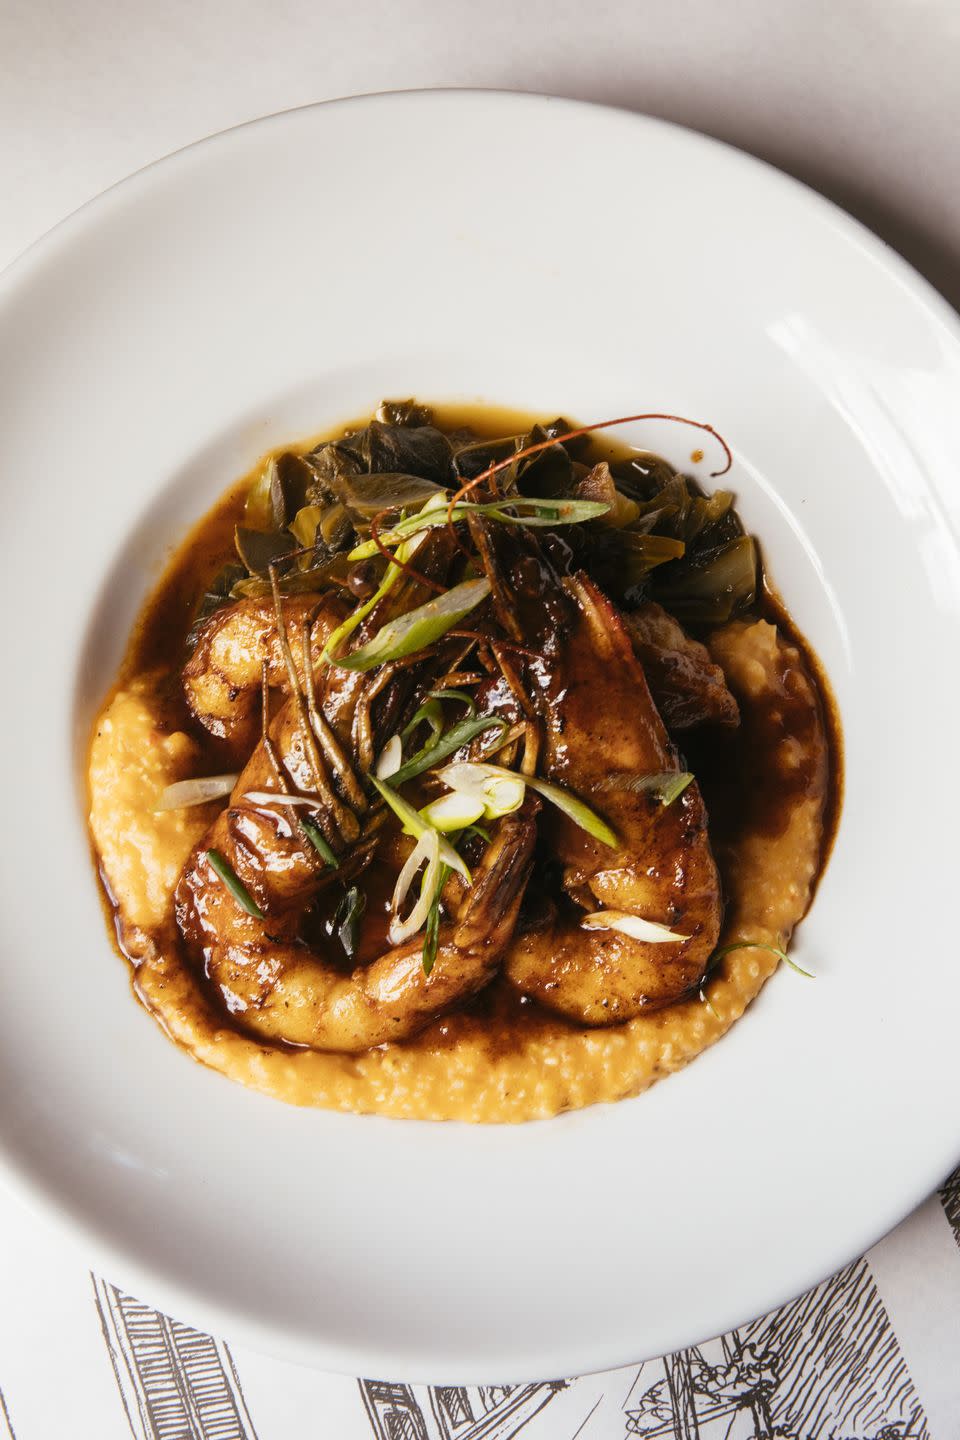 Barbecue Shrimp with Pimiento Cheese Grits at Bayona